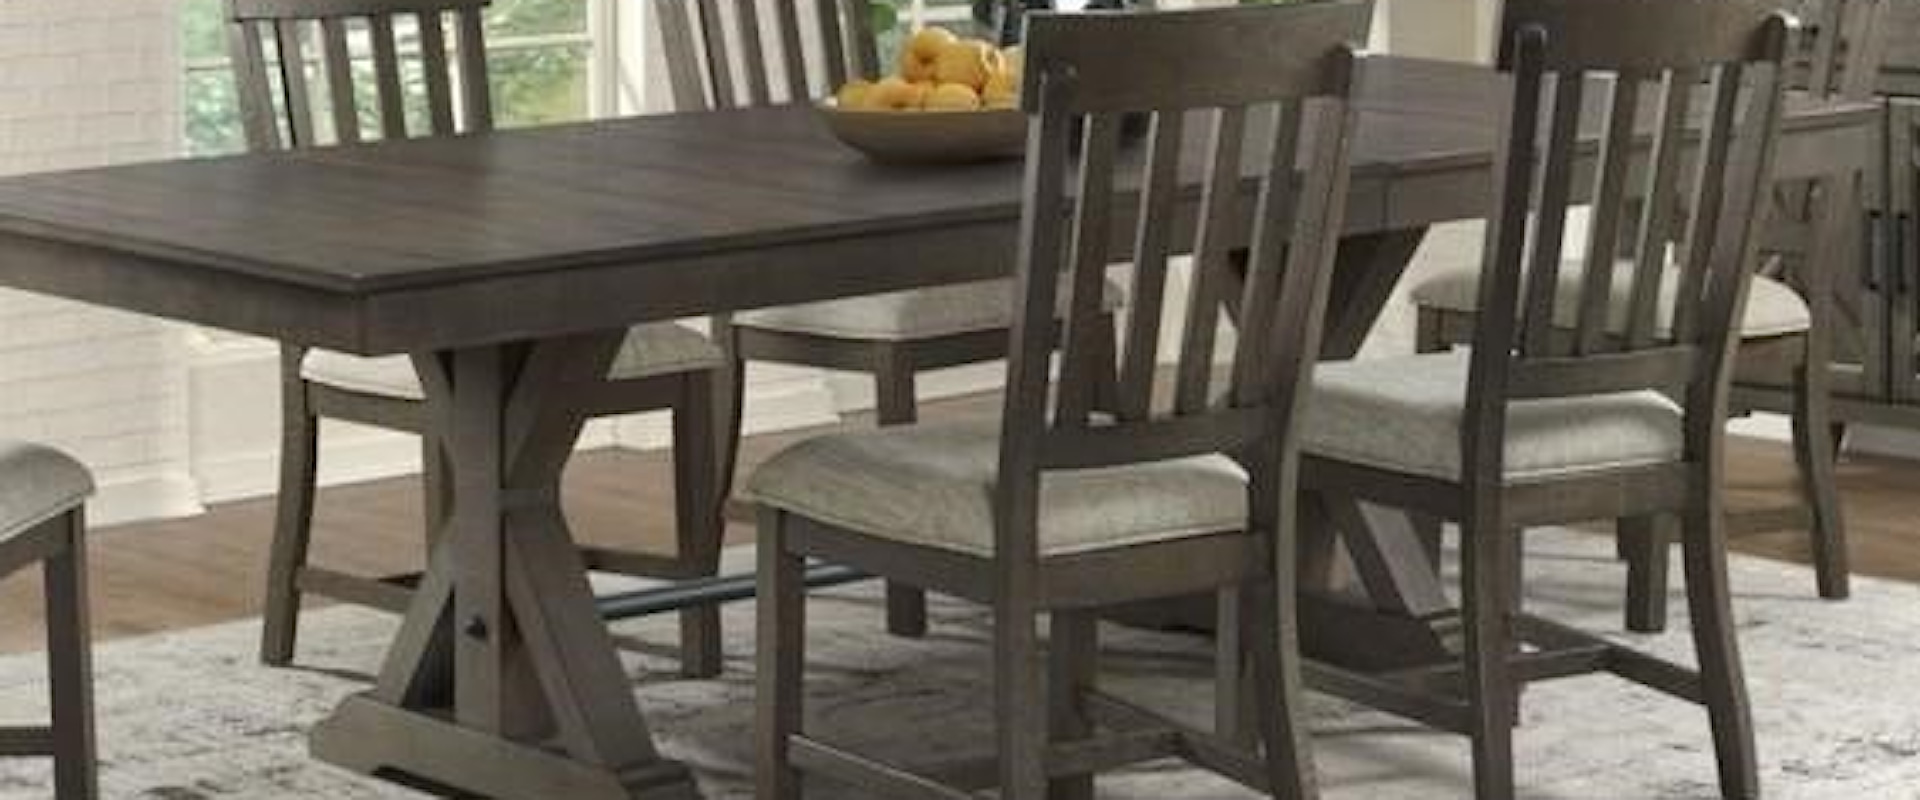 5-Piece dining set includes a table and 4 side chairs!